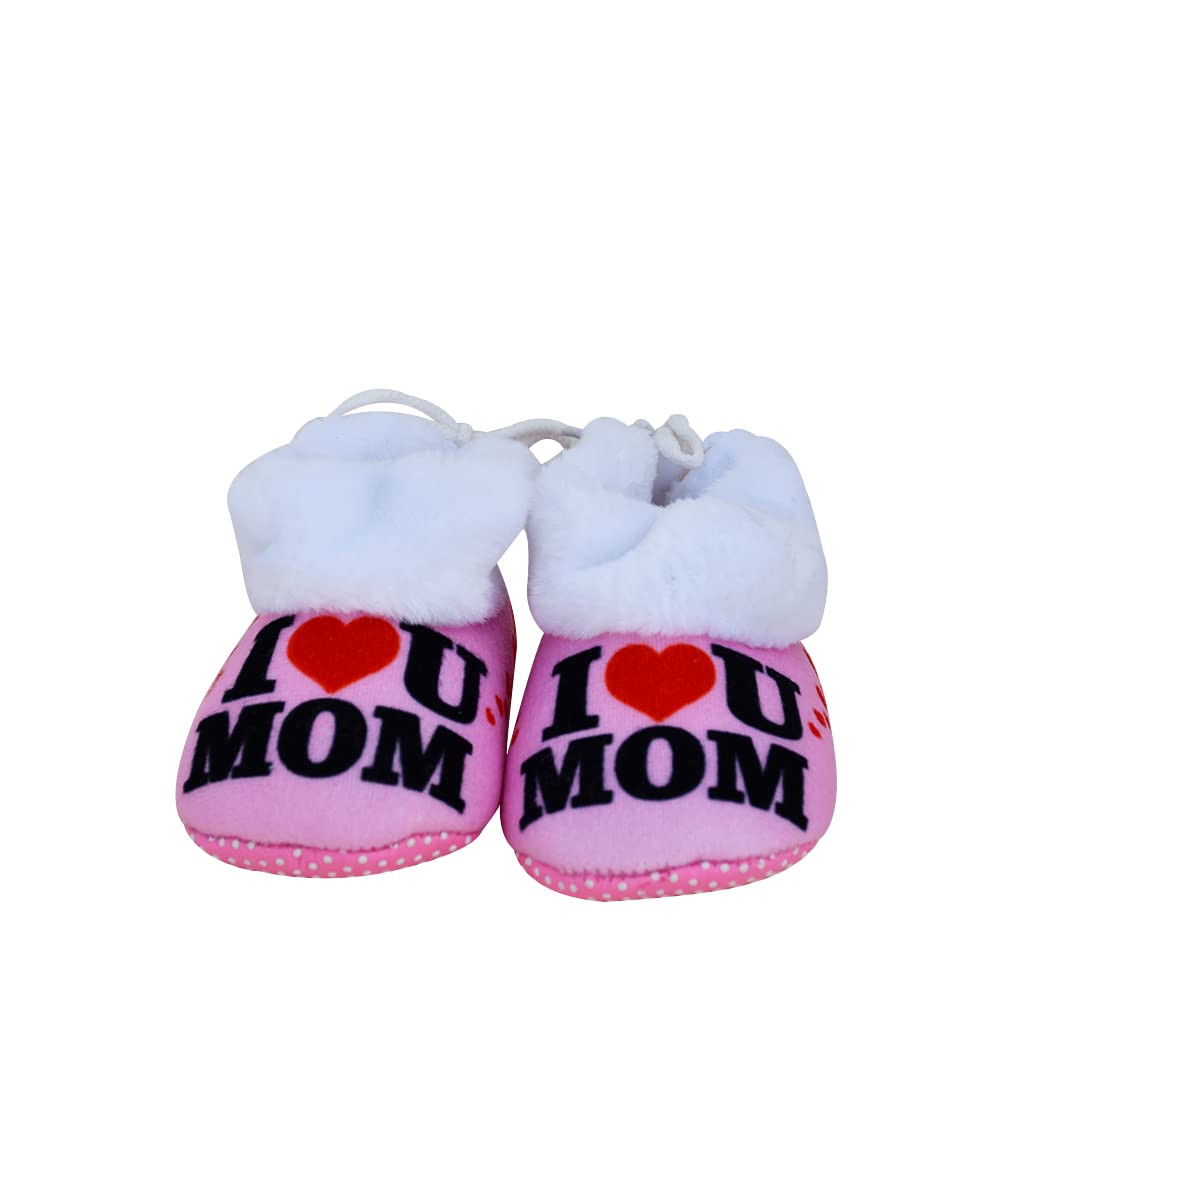 Buy Soft & Comfortable Baby Shoes Online | Smiley Buttons